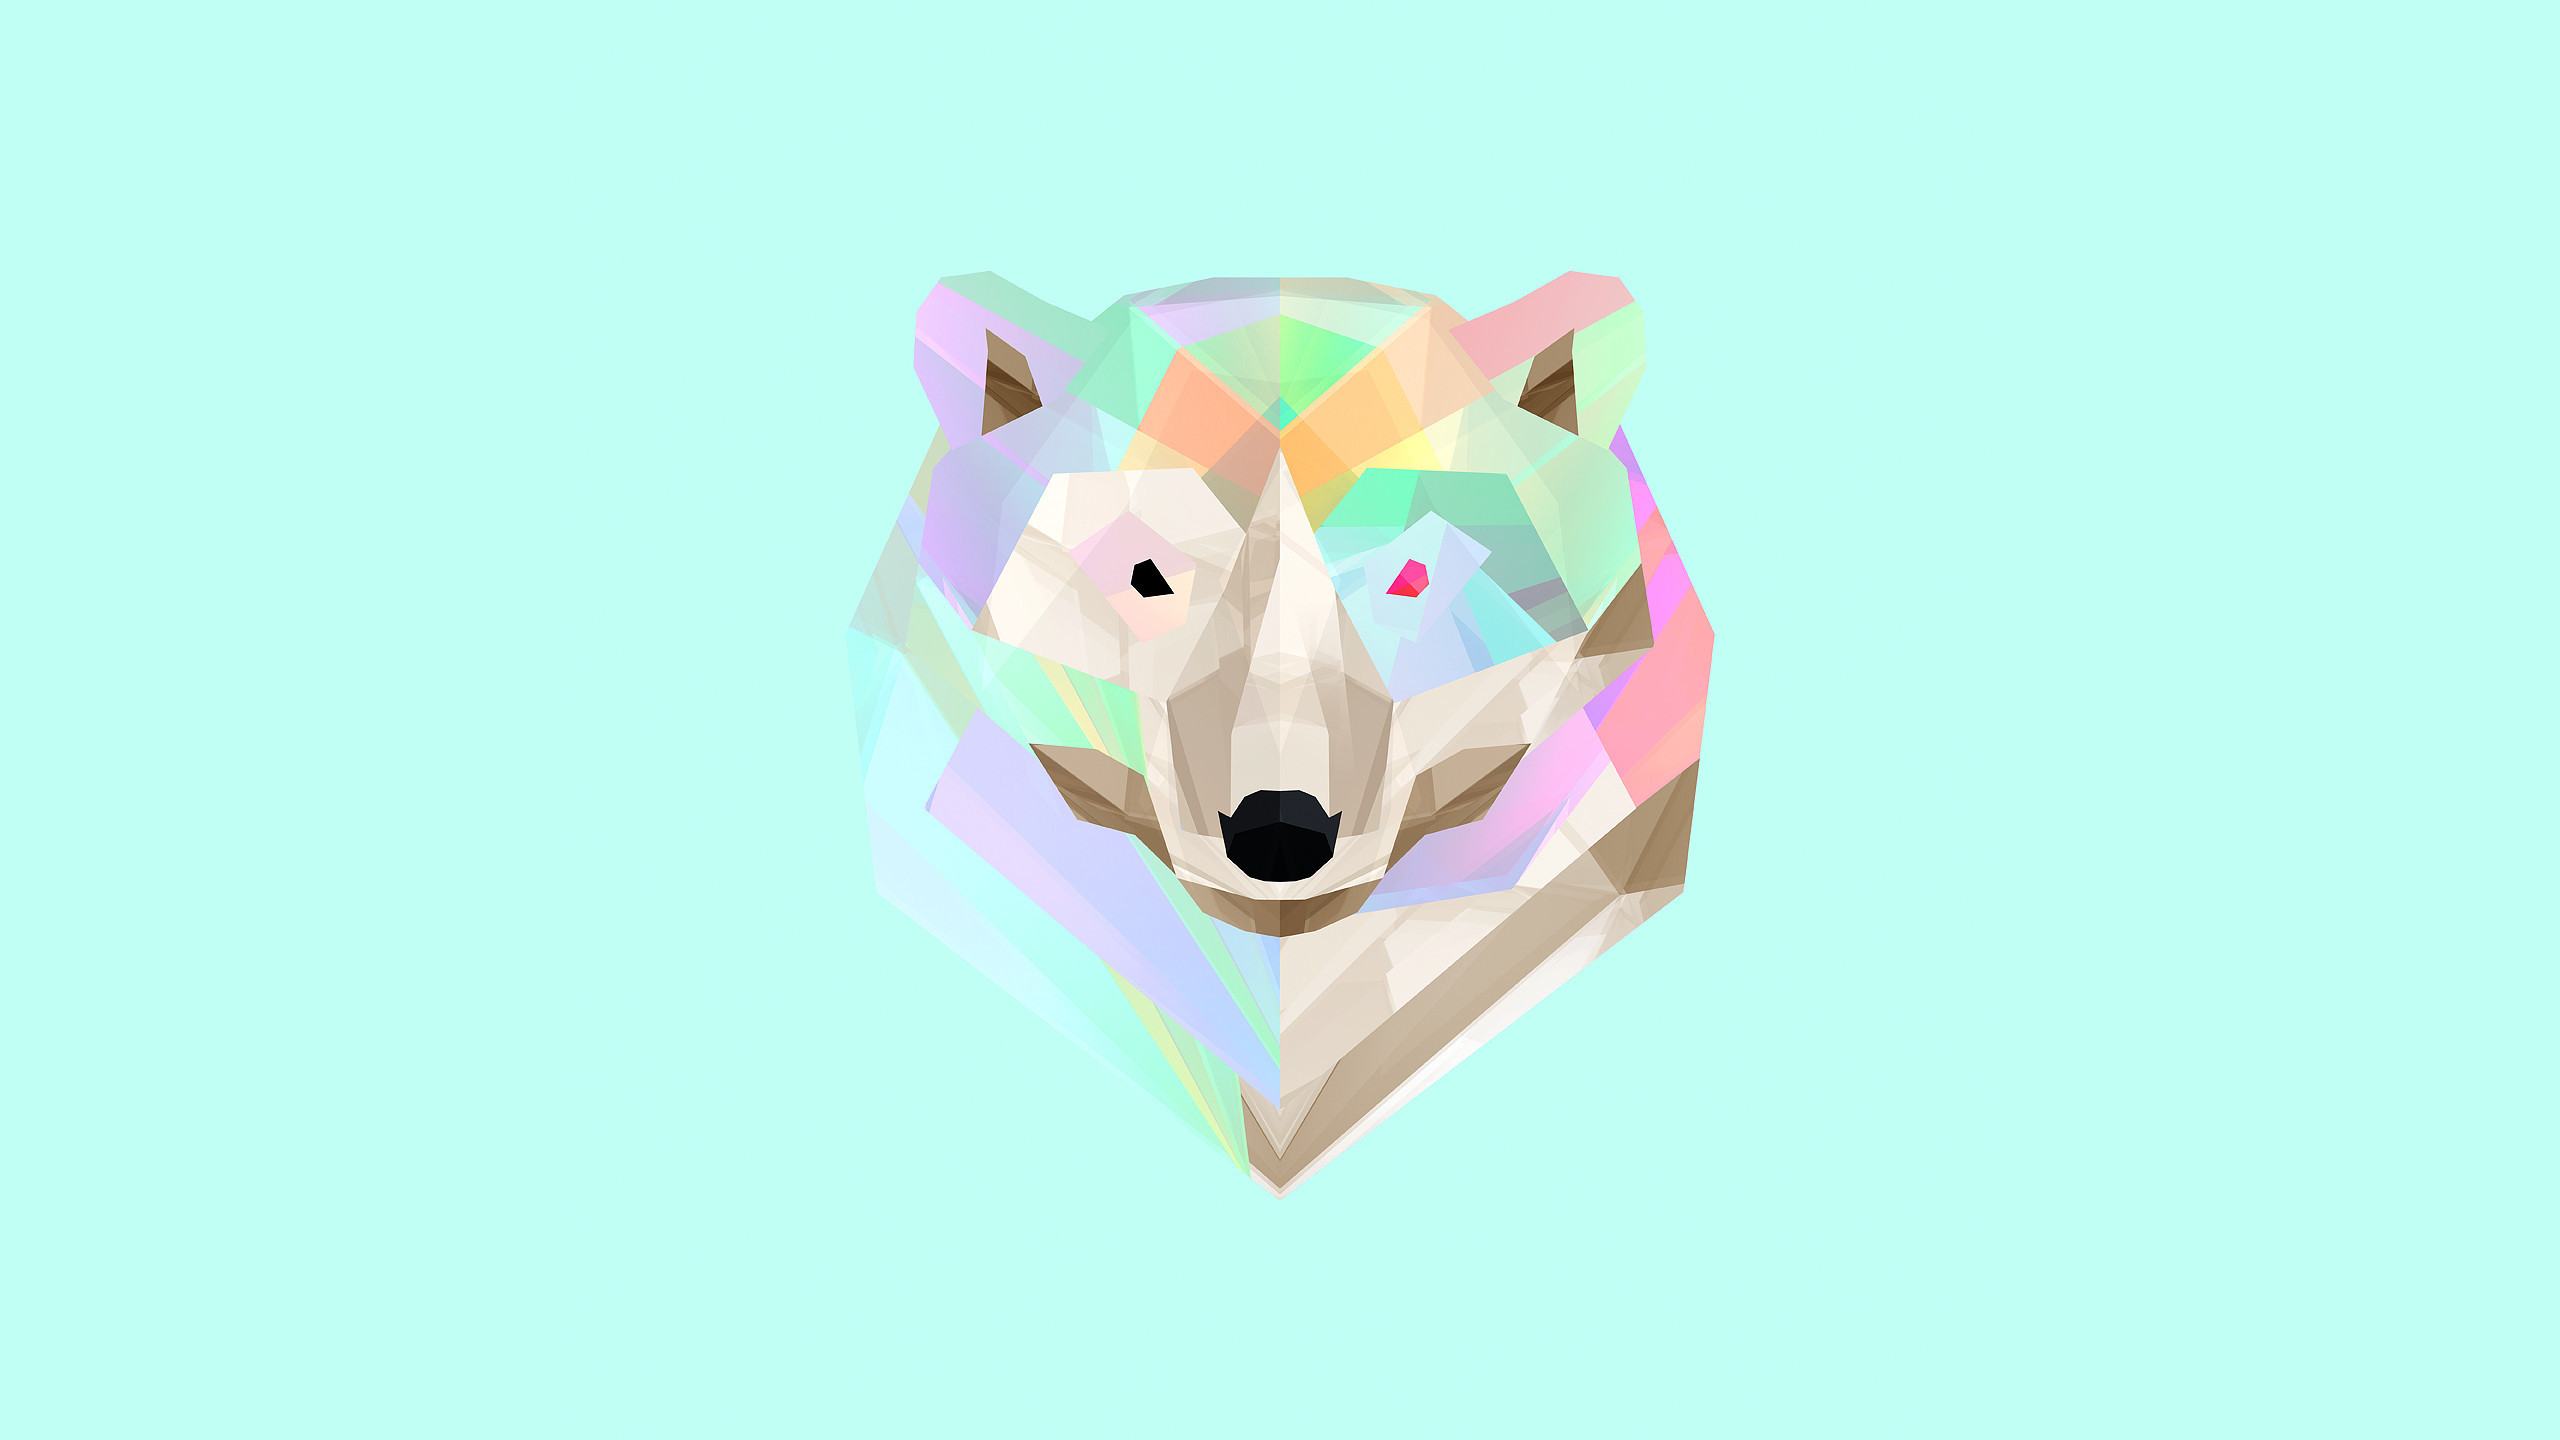 2560x1440 Animal Wallpapers. by anamethatissuperlongandawesomeDec 9 2014. Load 5 more  images Grid view